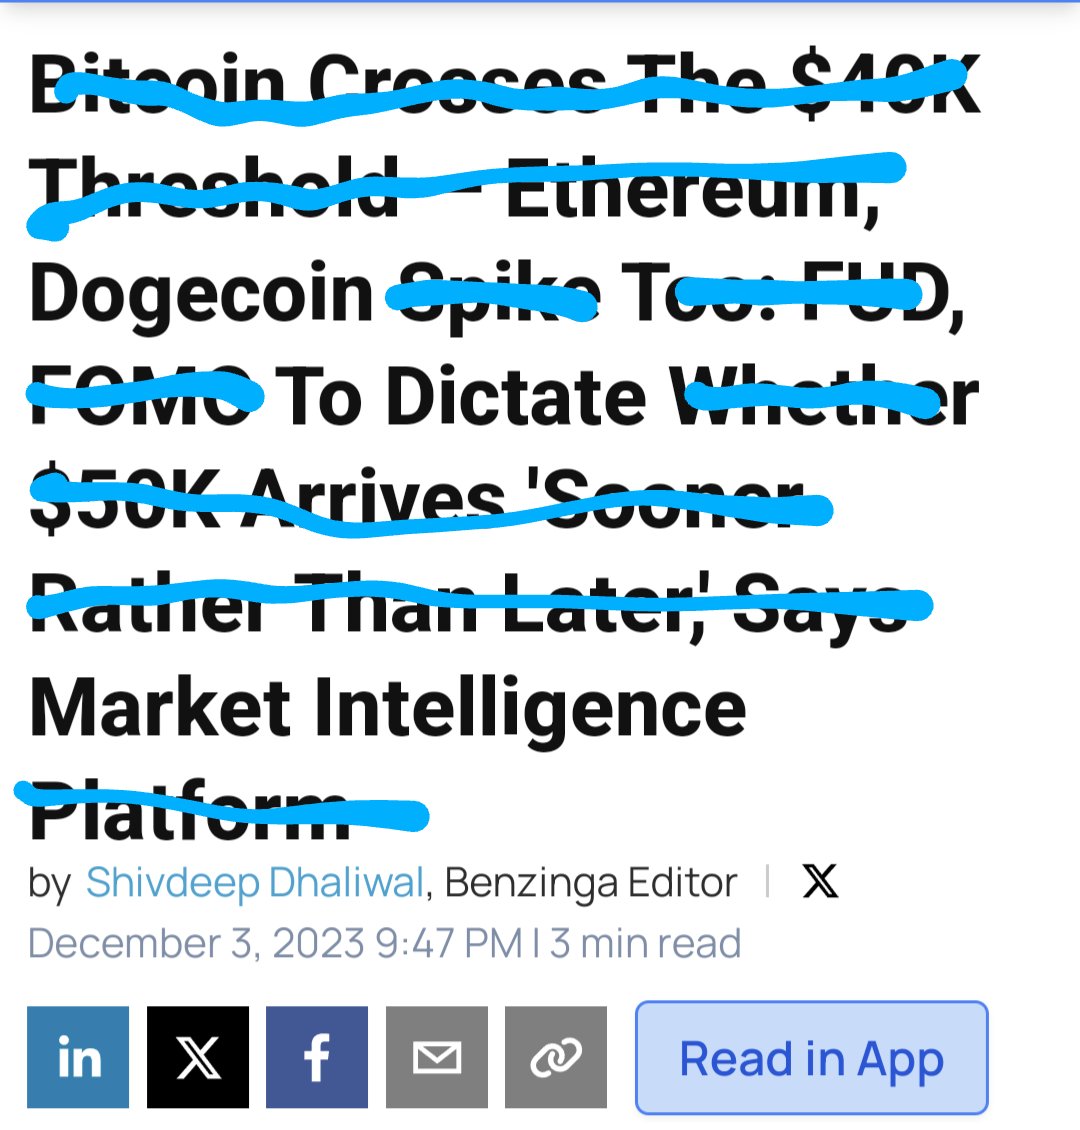 #dogecoin is smart